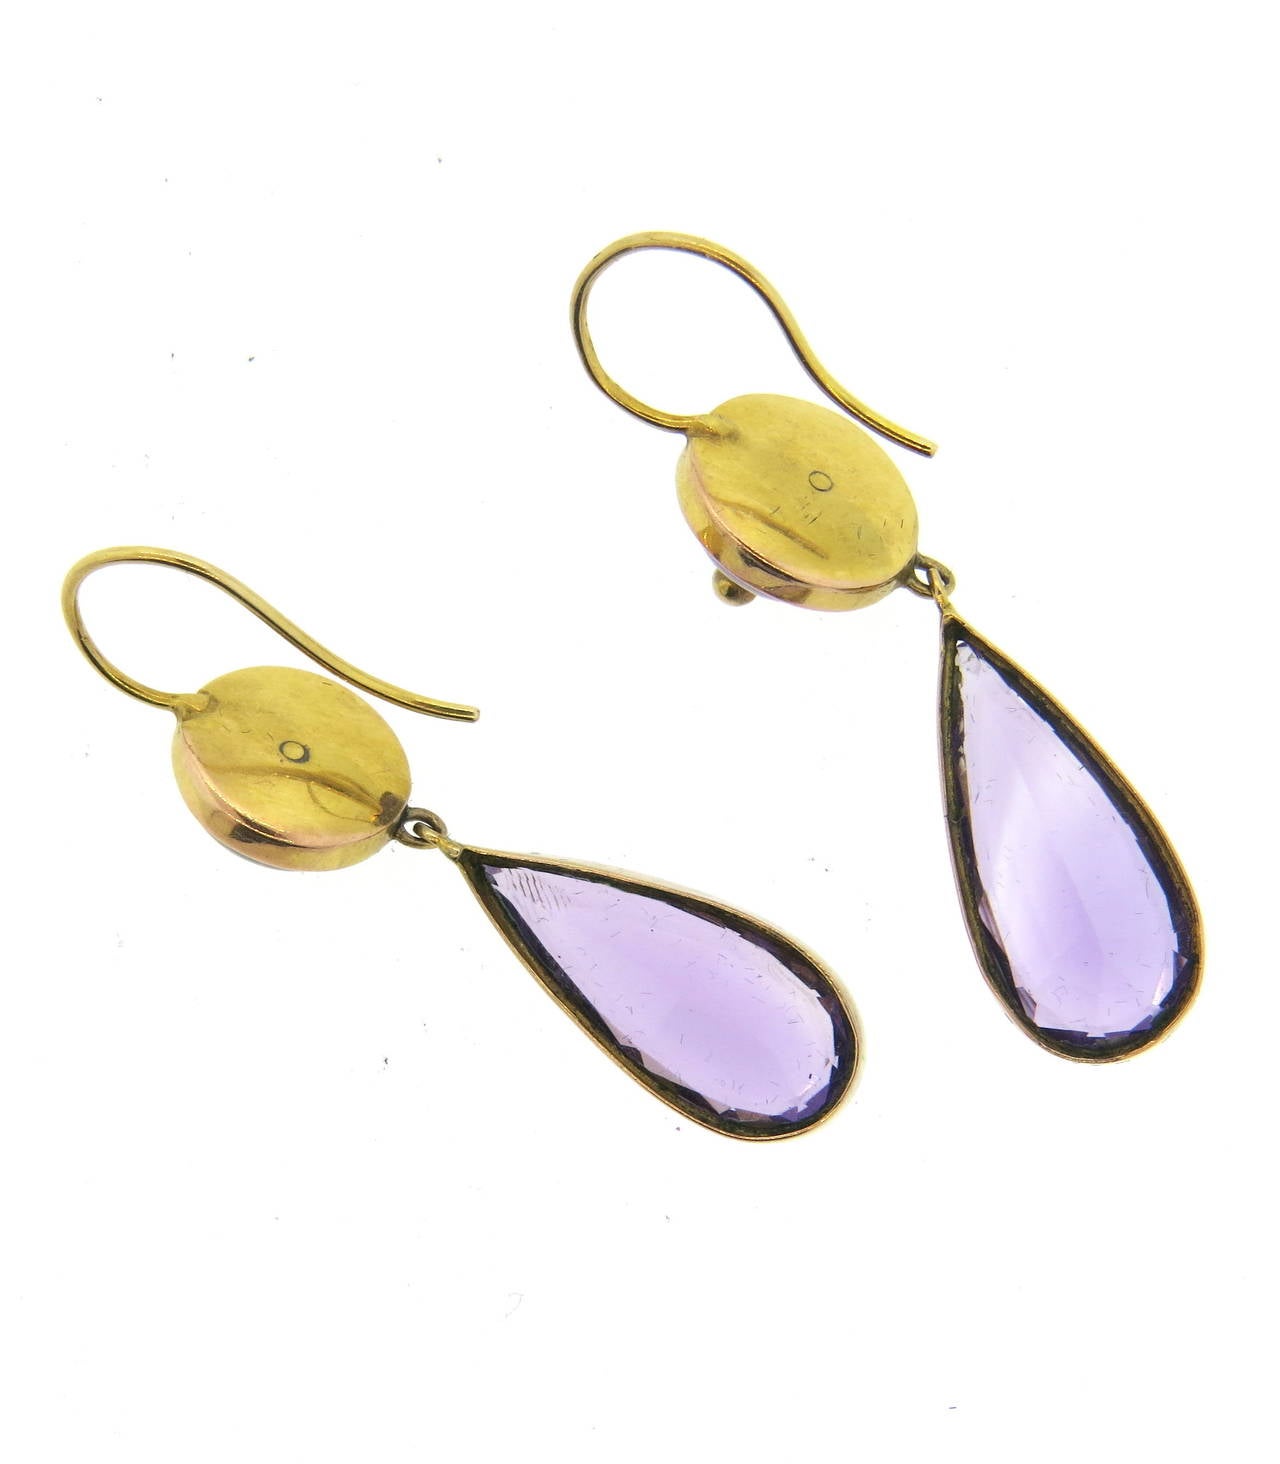 Victorian 14k gold earrings, set with amethyst gemstones. Earrings measure 43mm with wire x 10.5mm wide. Weight - 7.1 grams